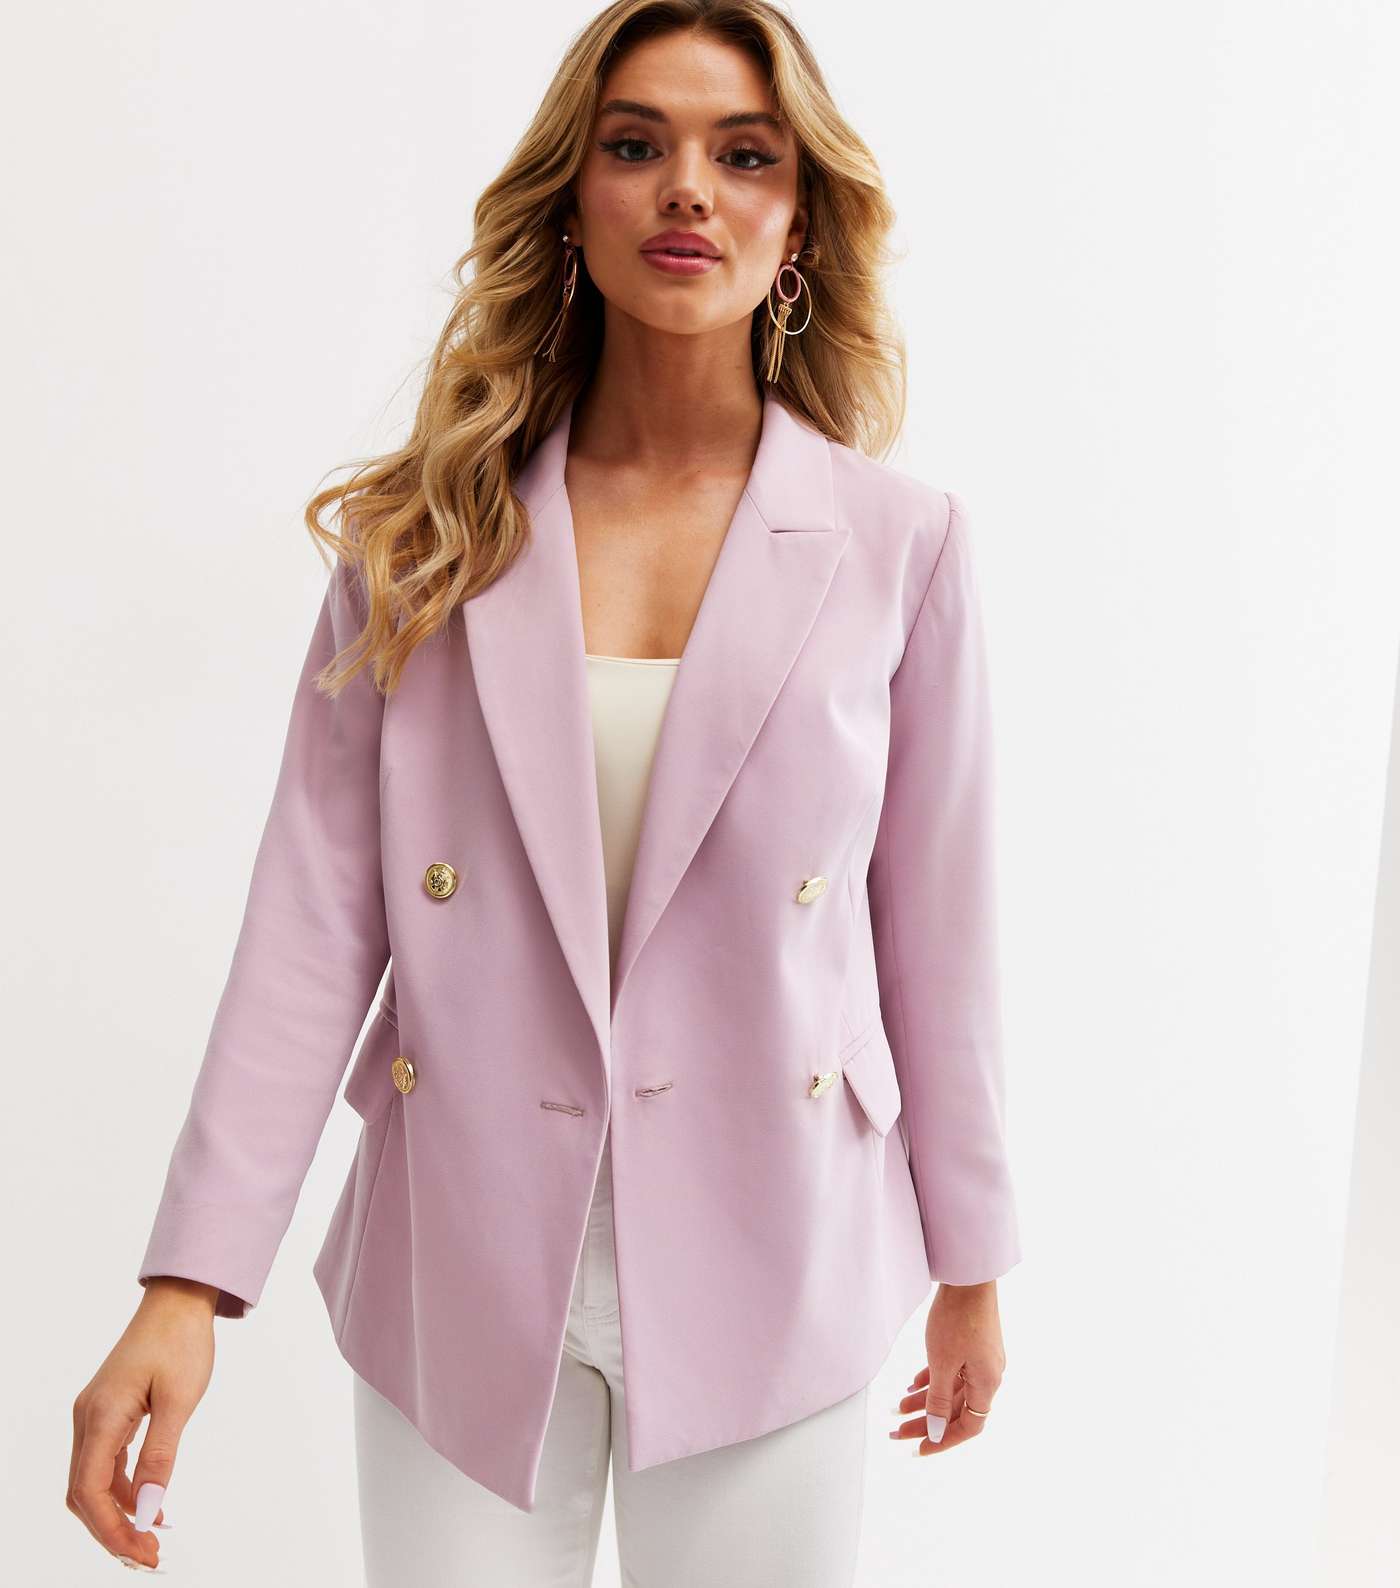 Dress for Success Lilac Double Breasted Blazer